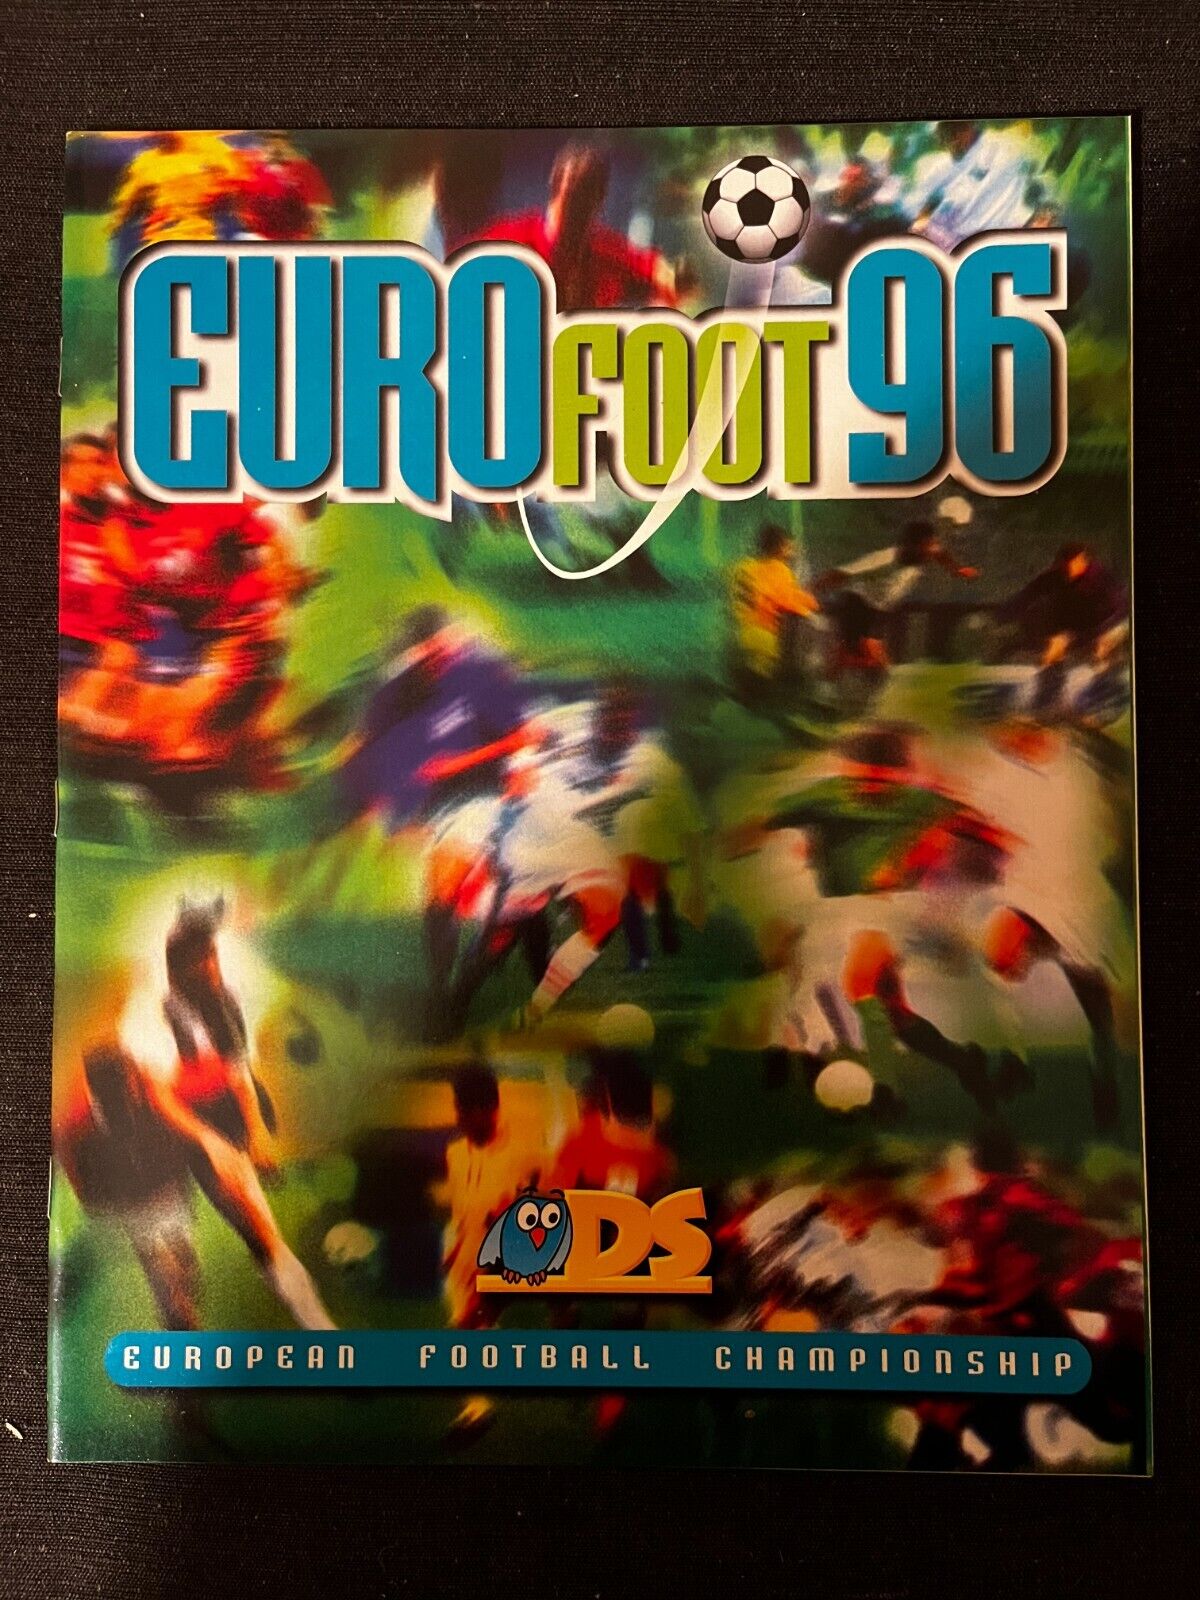 NO PANINI EMPTY ALBUM DS COLLECTION EURO 1996 FOOT MINT VERY GOOD CONDITION RARE